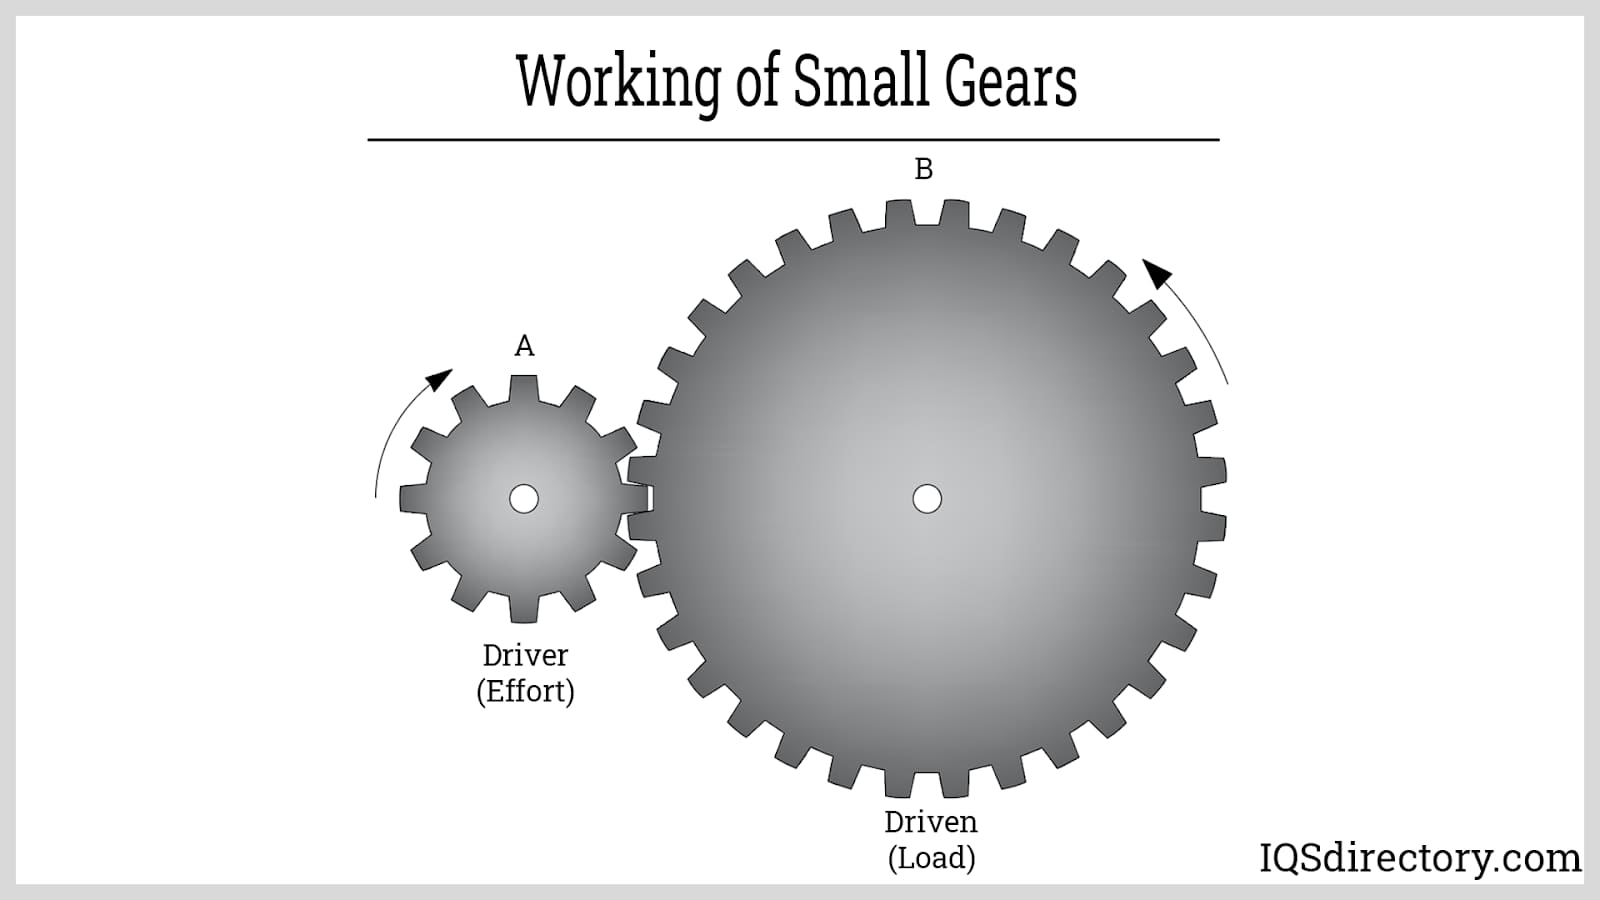 Working of Small Gears